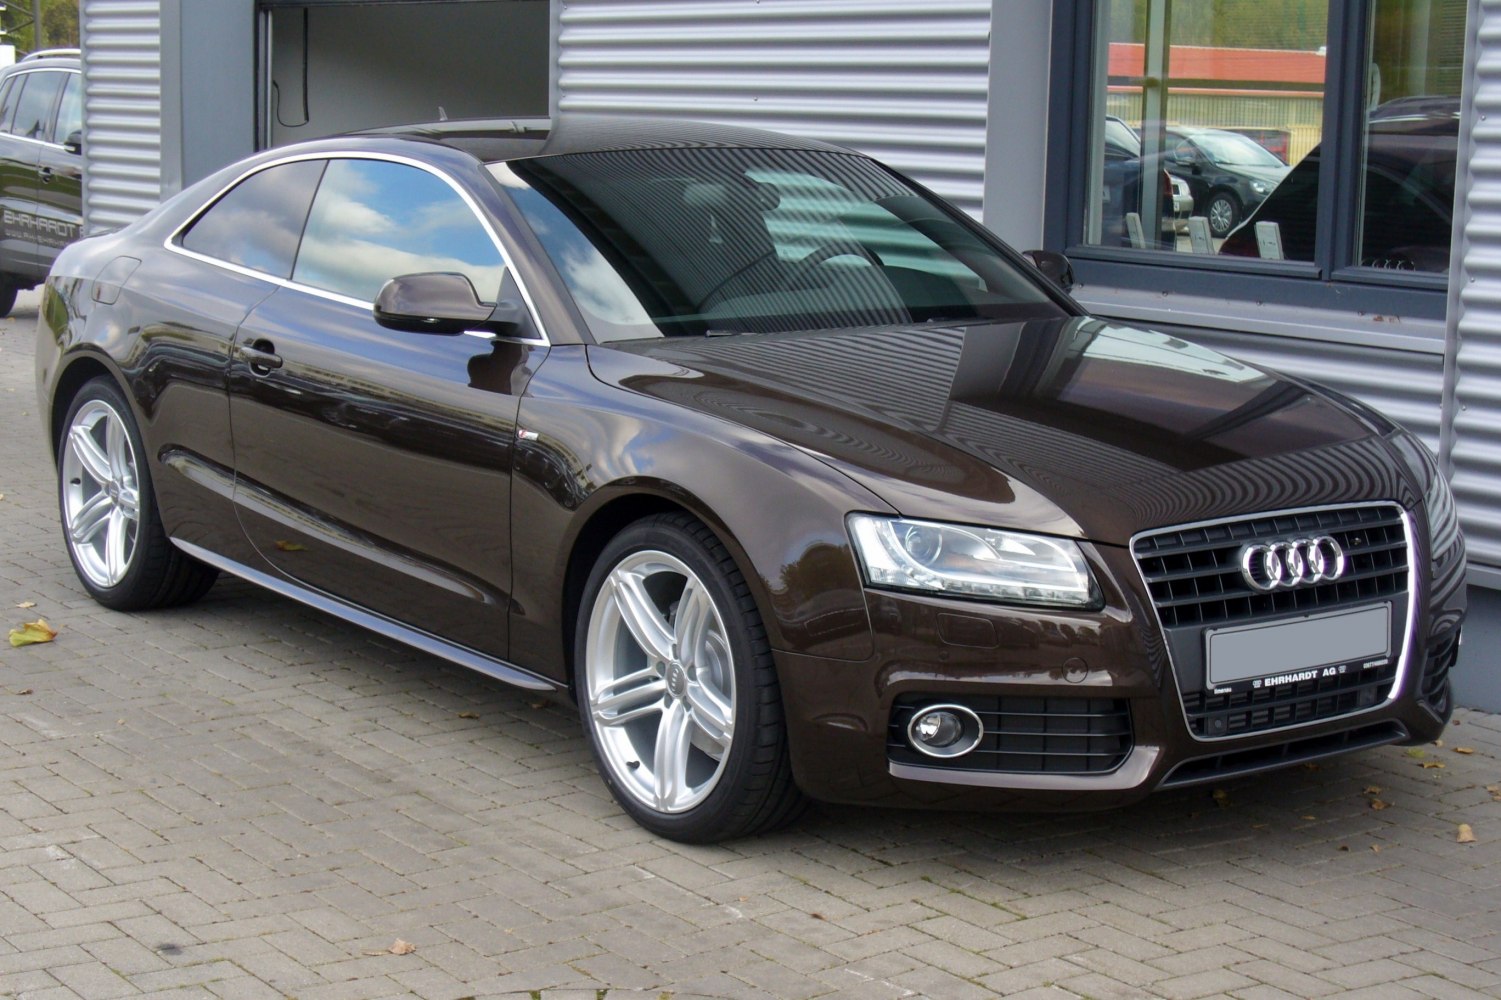 https://totalrenting.es/wp-content/uploads/2022/10/audi-a5-coupe-8t3-2008-1-8-tfsi-170-cv-coupe.png